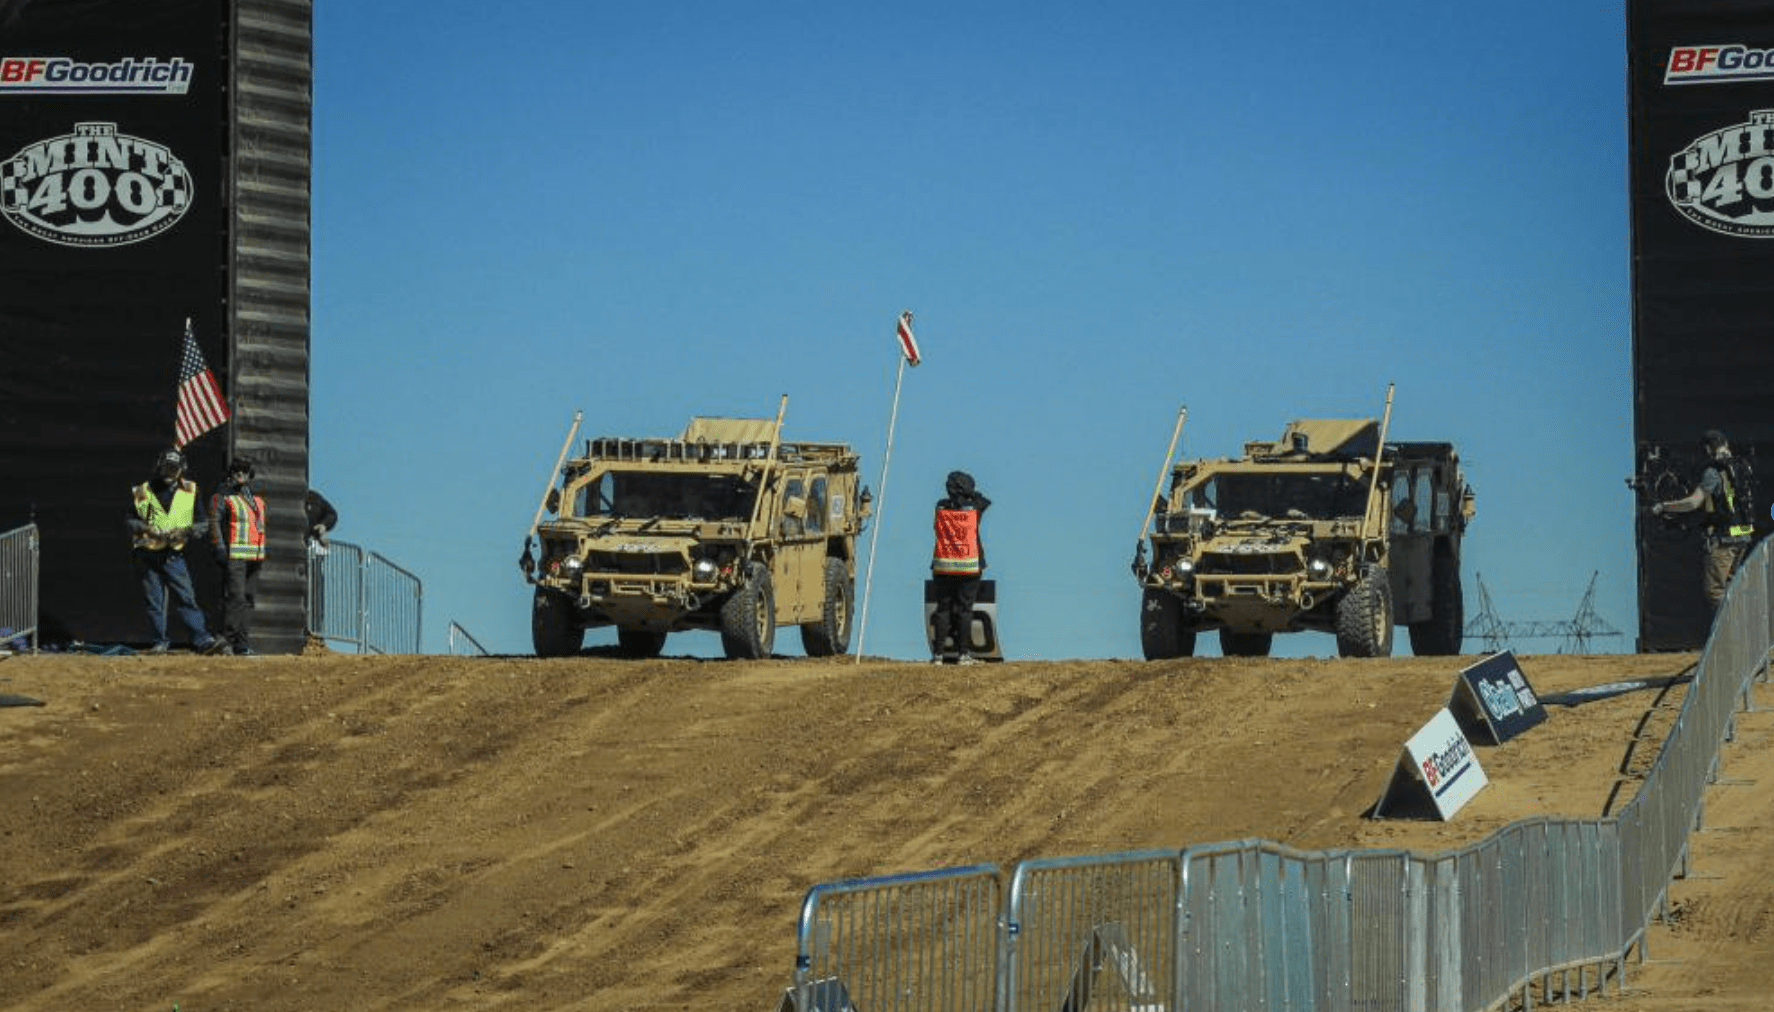 The two 5th SFG(A) teams wait for the signal to start the Mint 400 (U.S. Army)